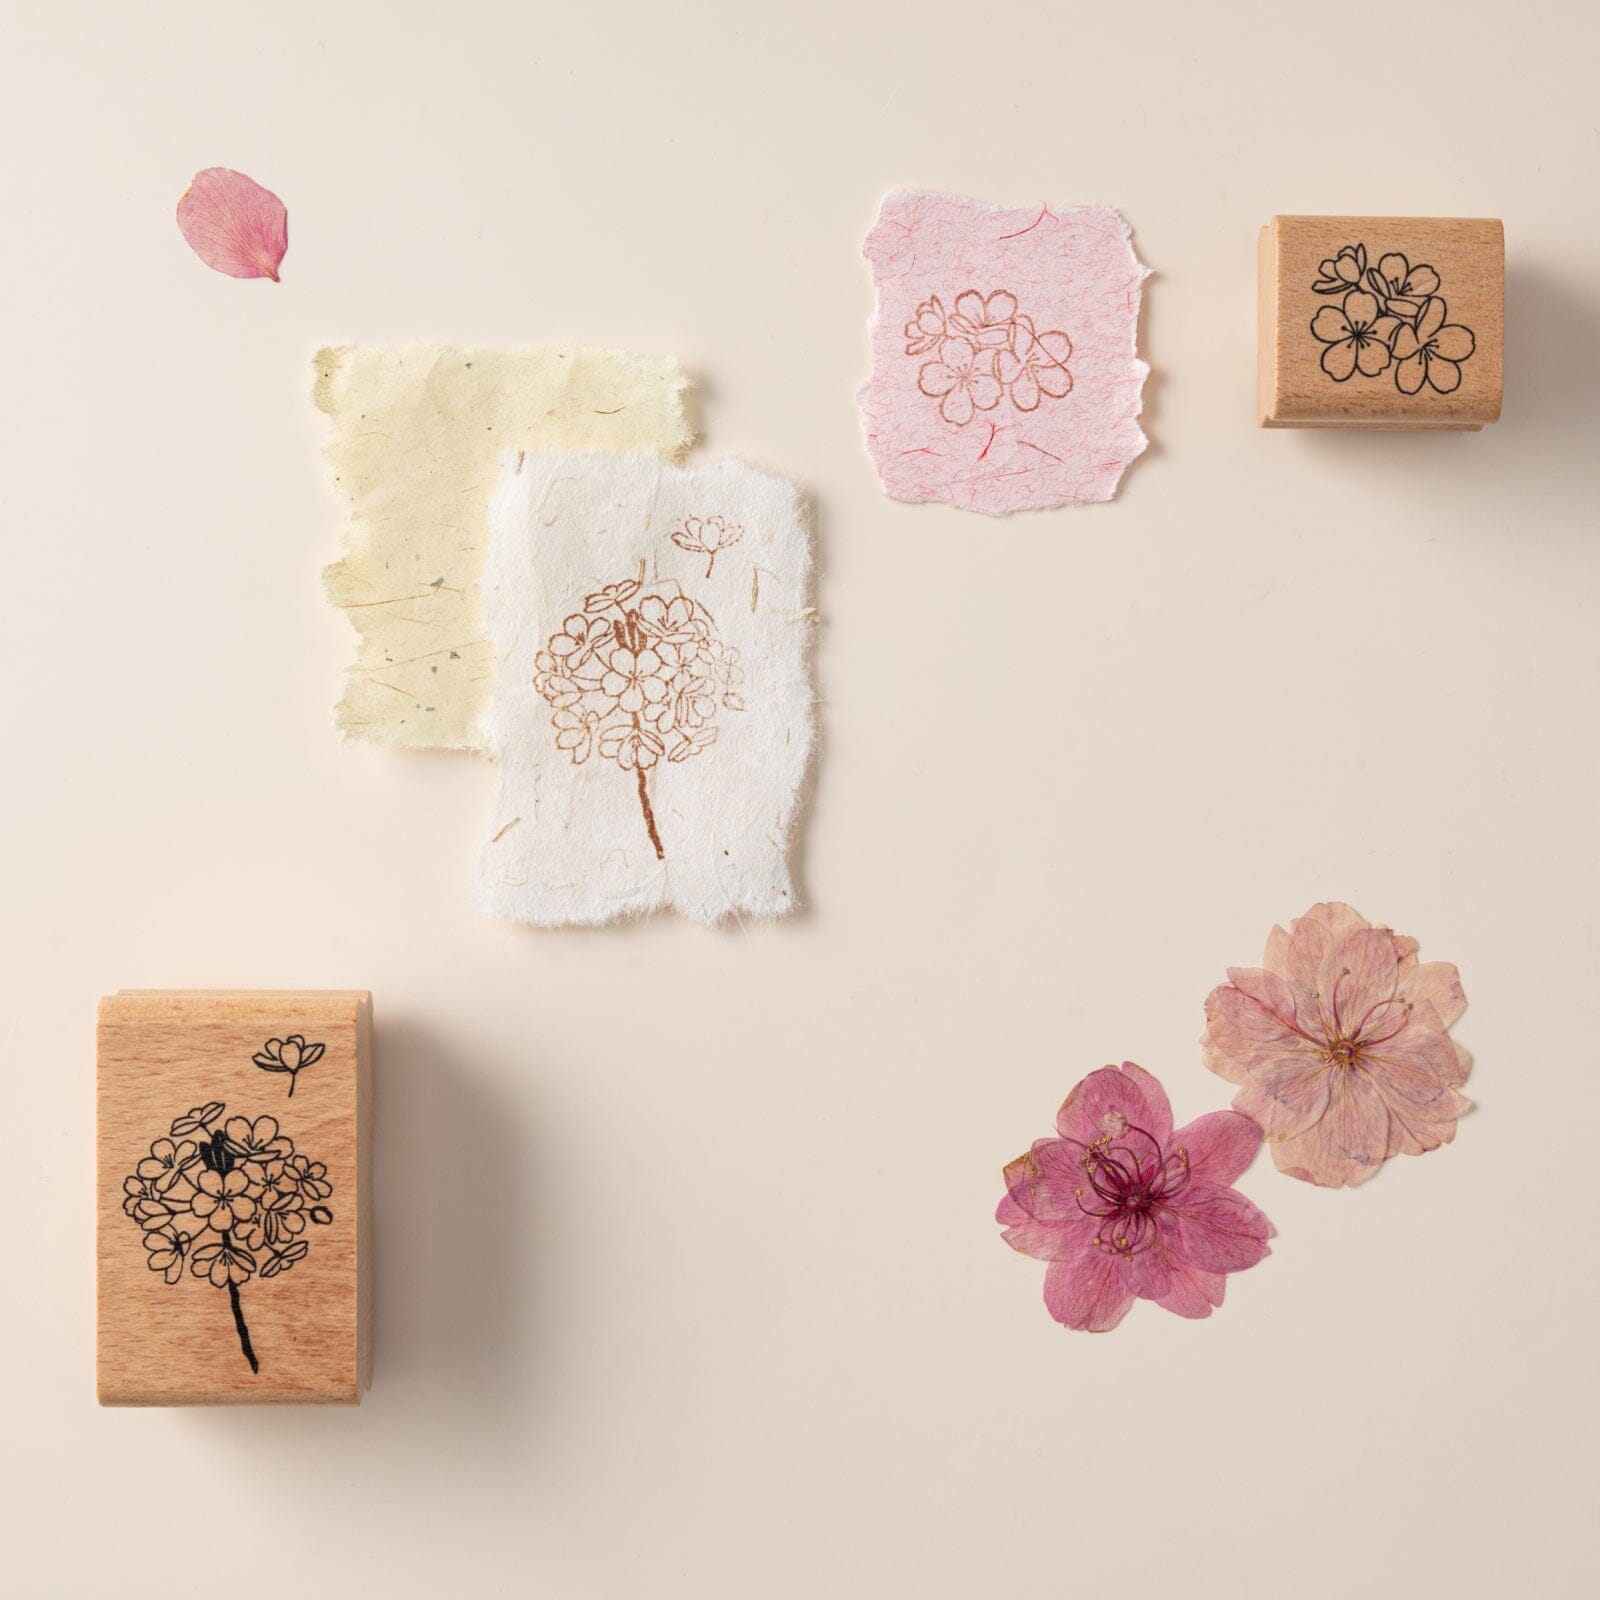 Hinoki into the blossom stamps on textured paper with dried flowers